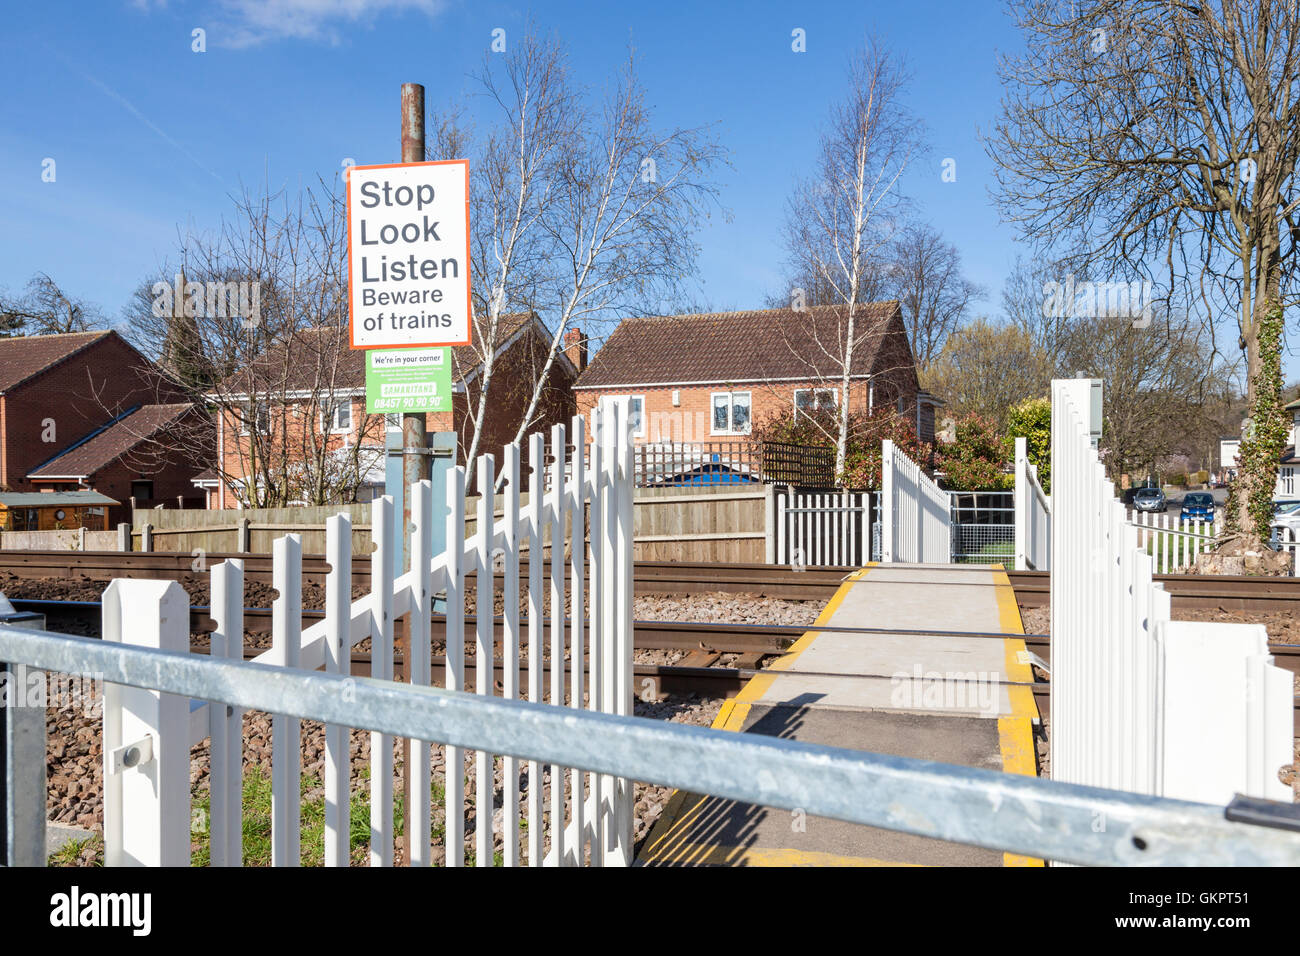 Unmanned railway crossing with fencing and barrier for pedestrians, Nottinghamshire, England, UK Stock Photo